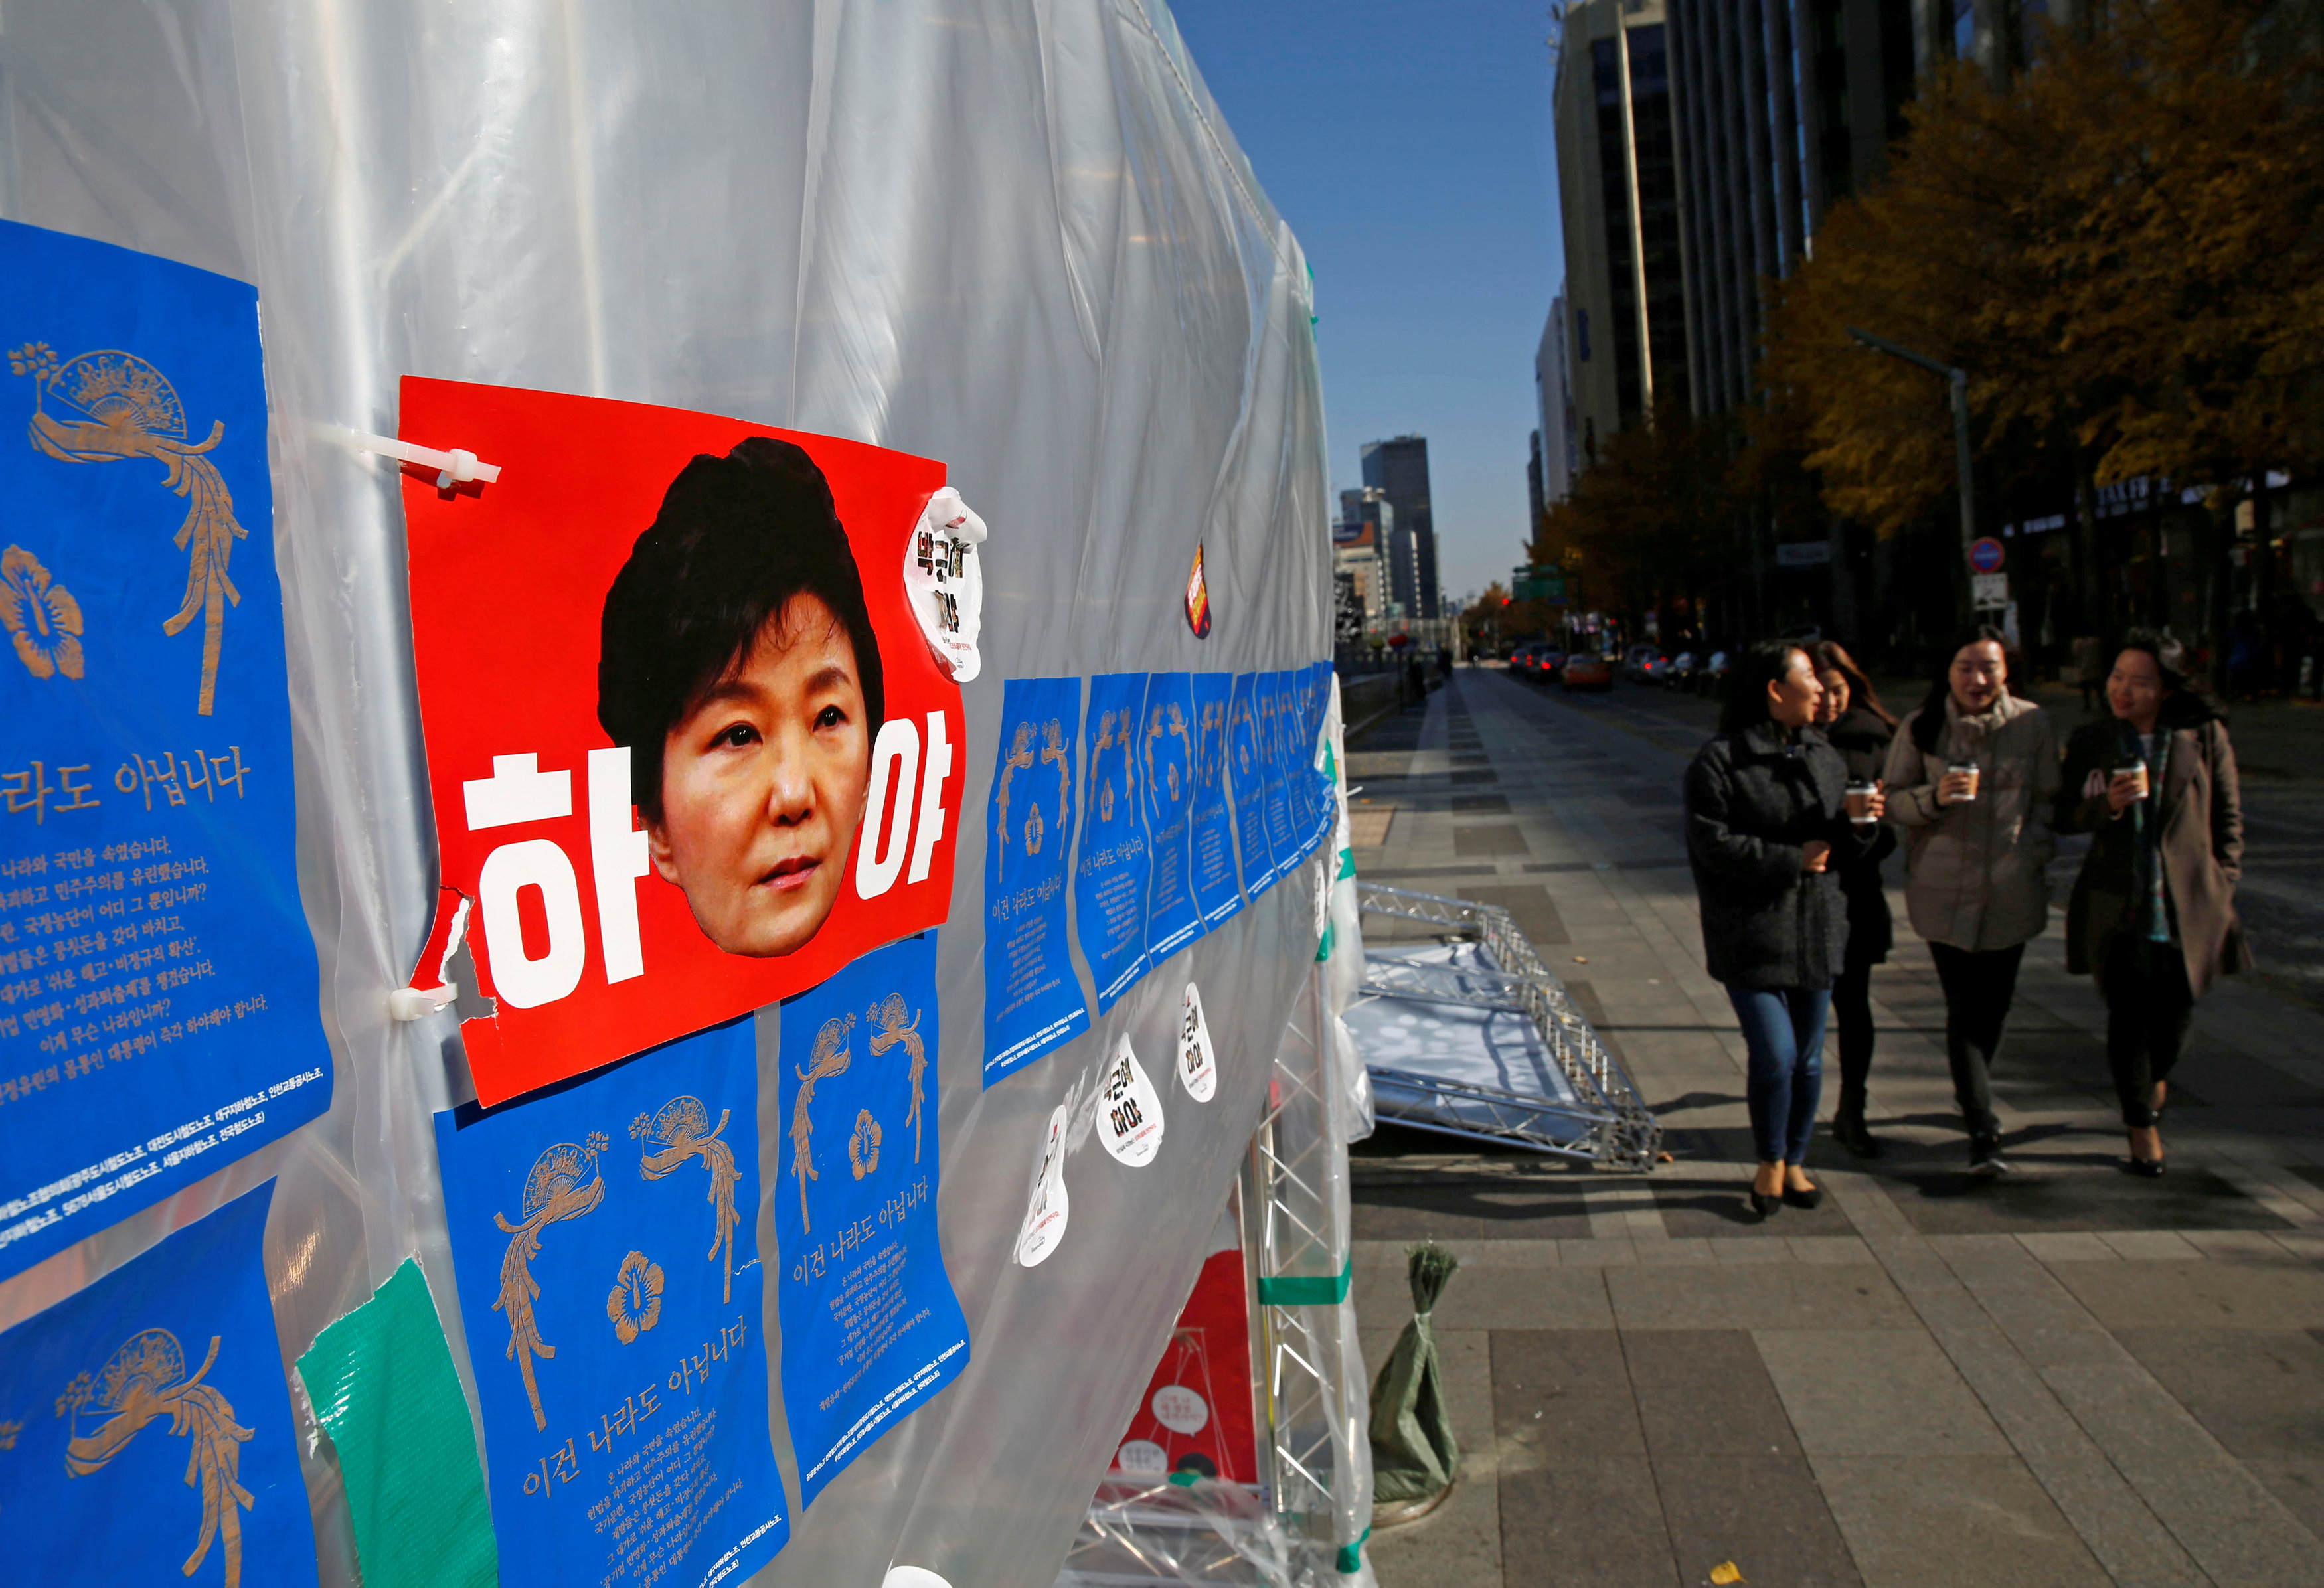 Posters demanding the resignation of South Korean President Park Geun-hye are seen on protesters' tents in central Seoul, South Korea , November 15, 2016. REUTERS/Kim Kyung-Hoonn